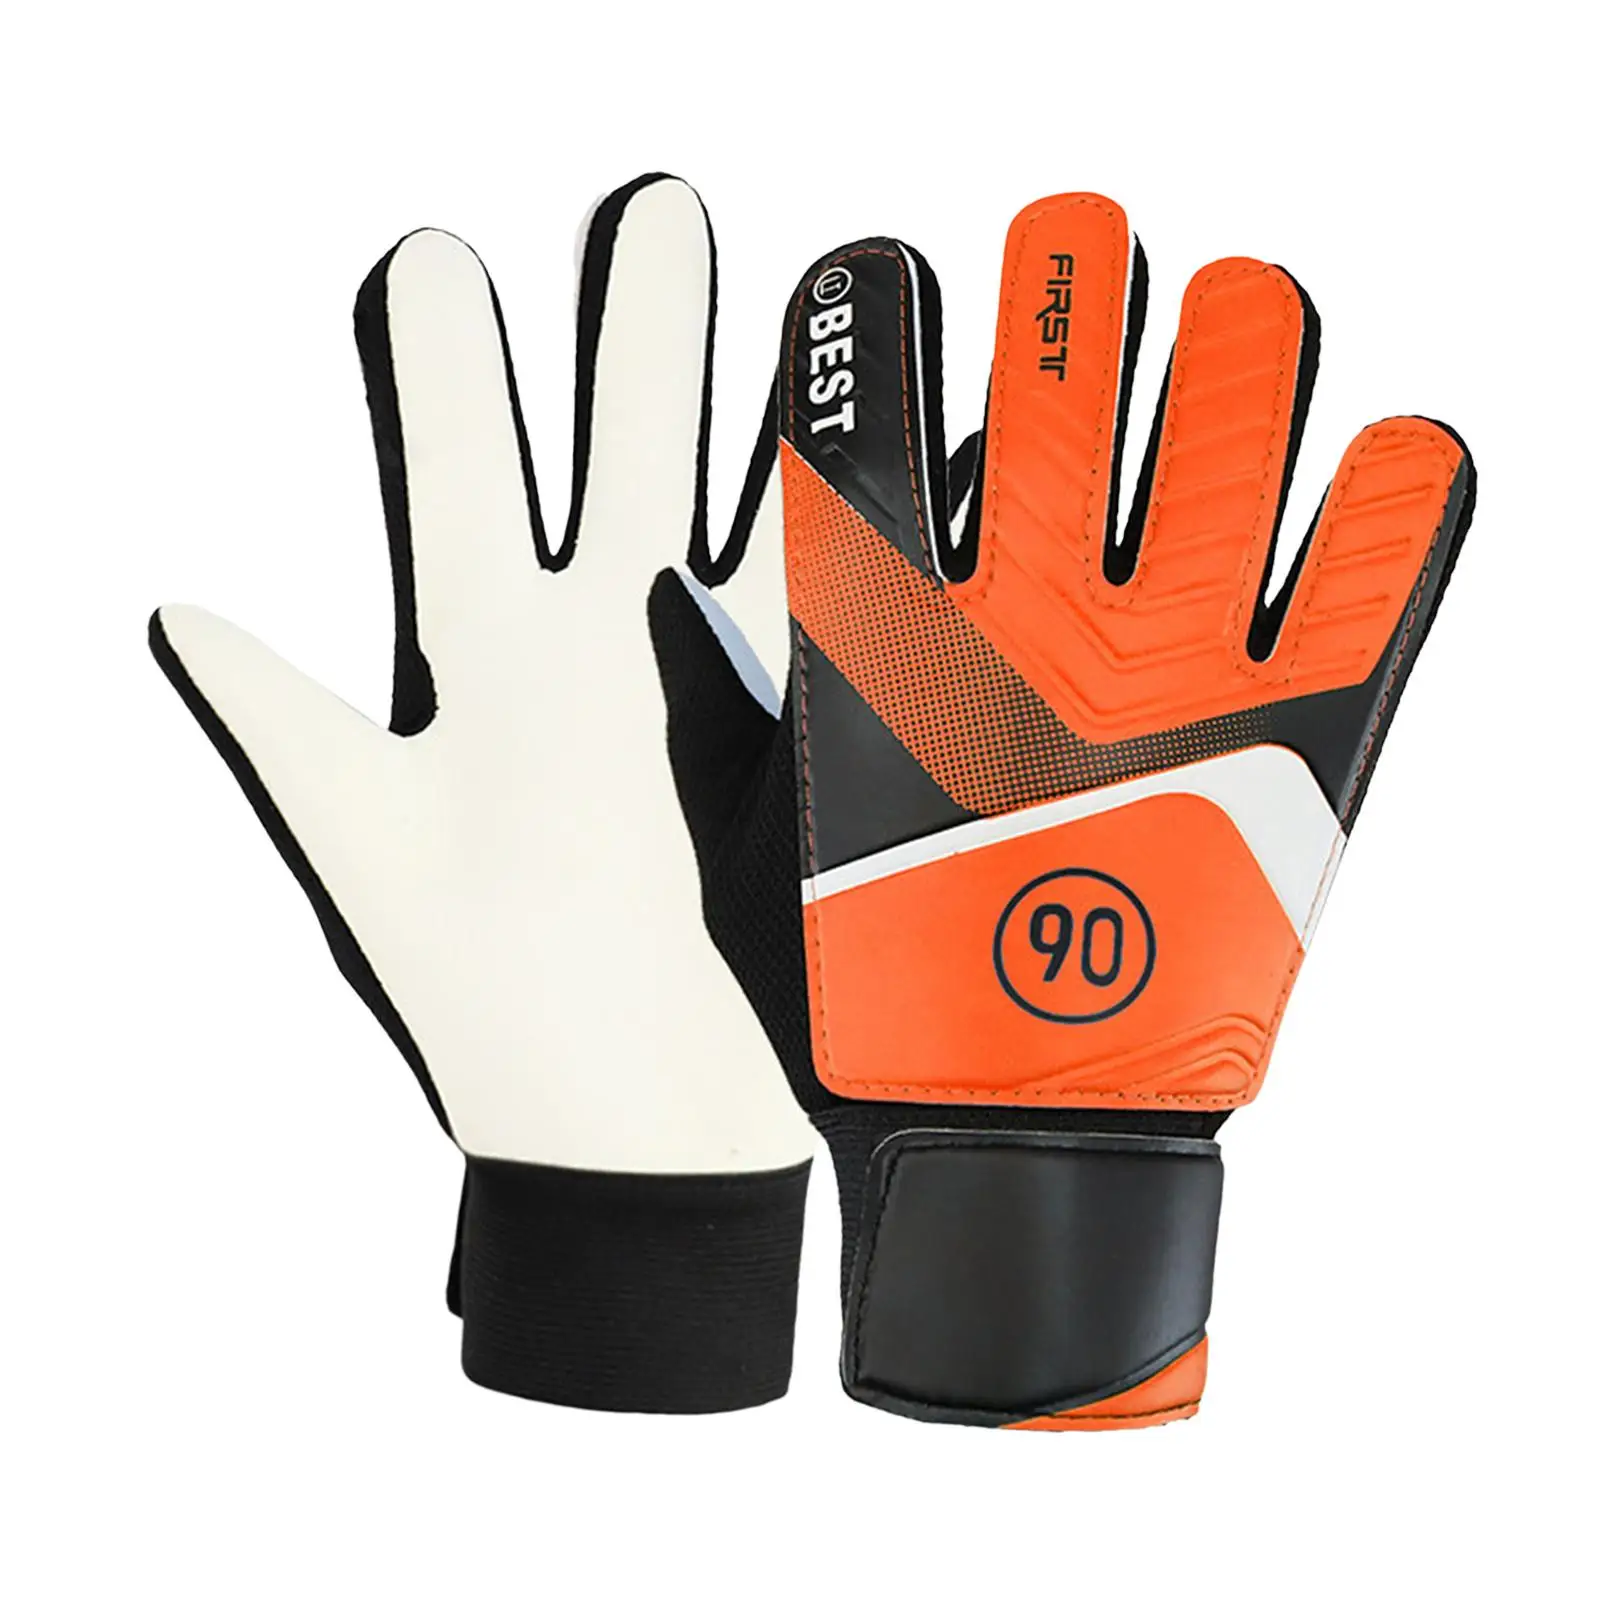 Goalkeeper Gloves Anticollision Finger Protection High Performance Match Professional Strong Grip Thickened for Kids Latex Palm